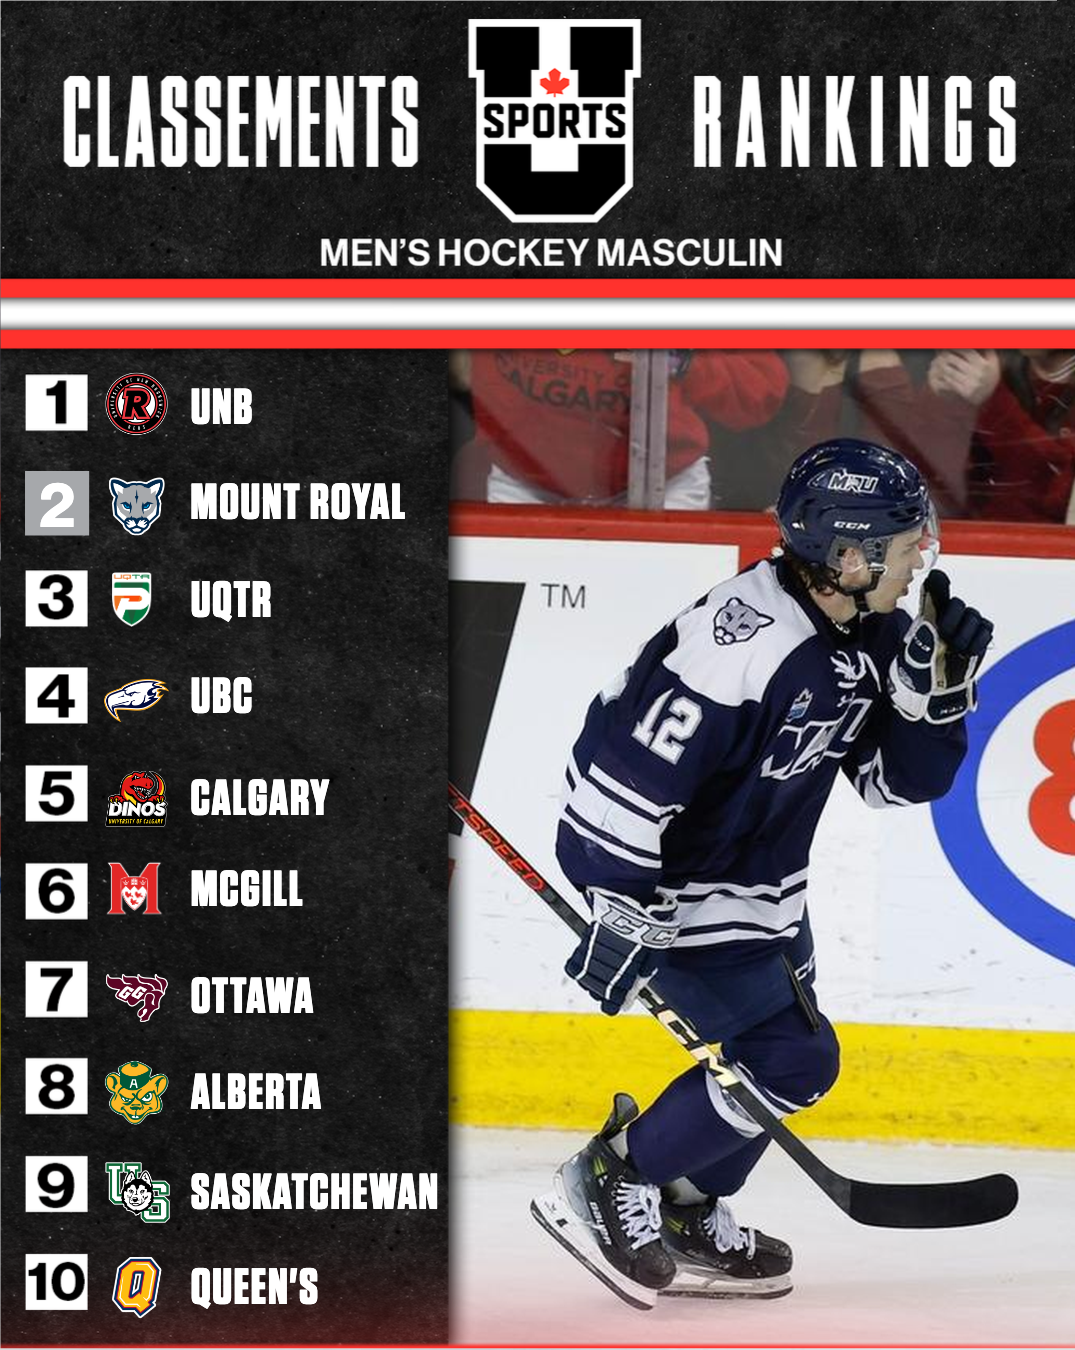 MHKY_TOP_10.png (1.64 MB)